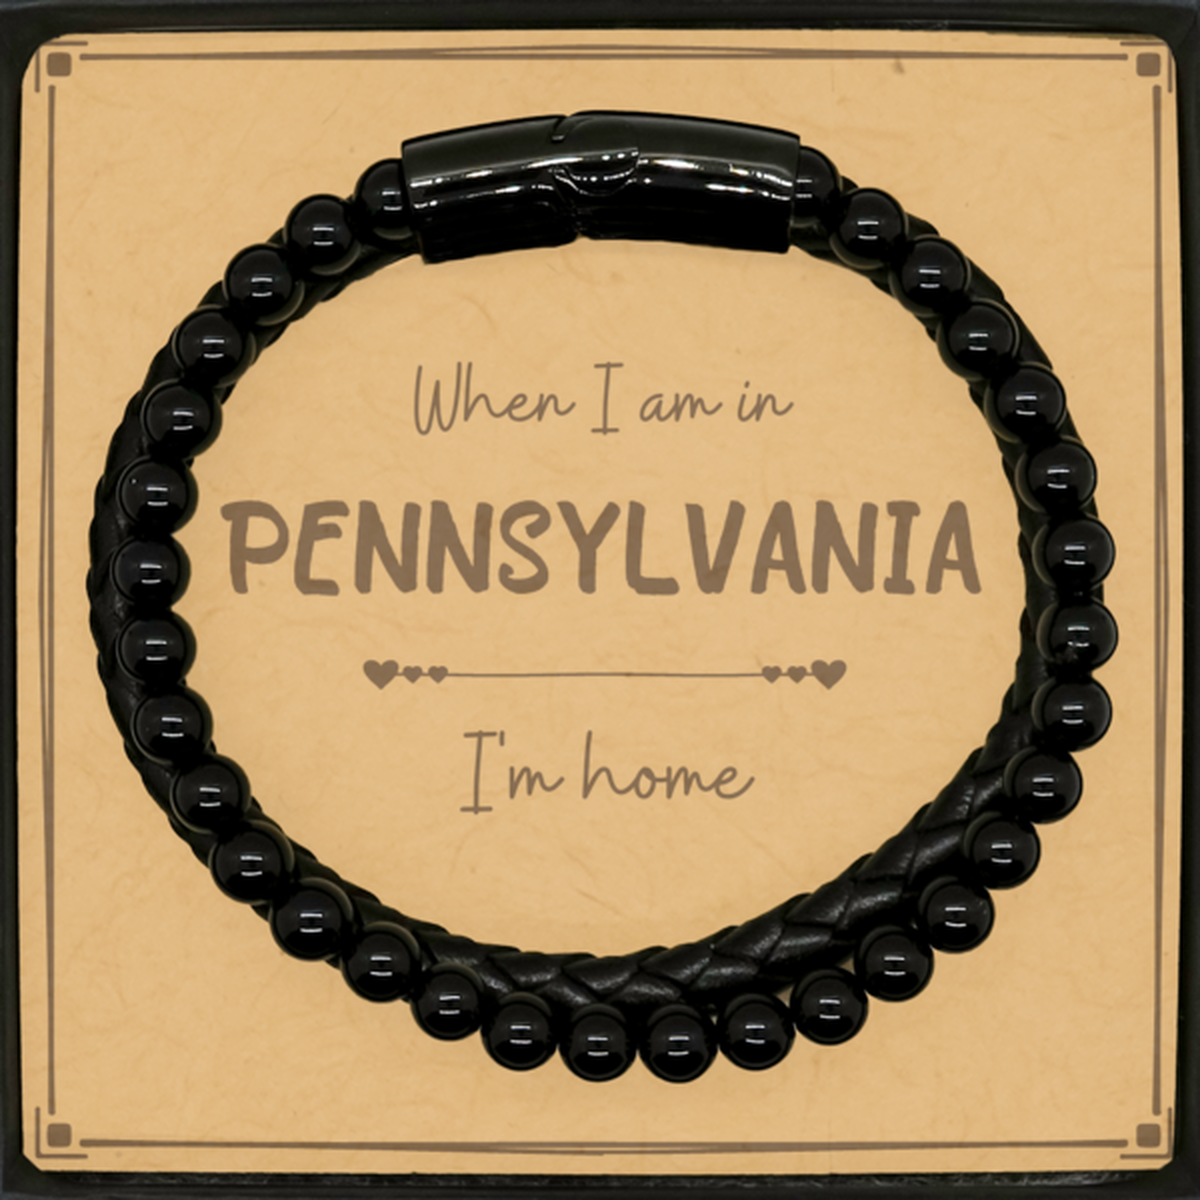 When I am in Pennsylvania I'm home Stone Leather Bracelets, Message Card Gifts For Pennsylvania, State Pennsylvania Birthday Gifts for Friends Coworker